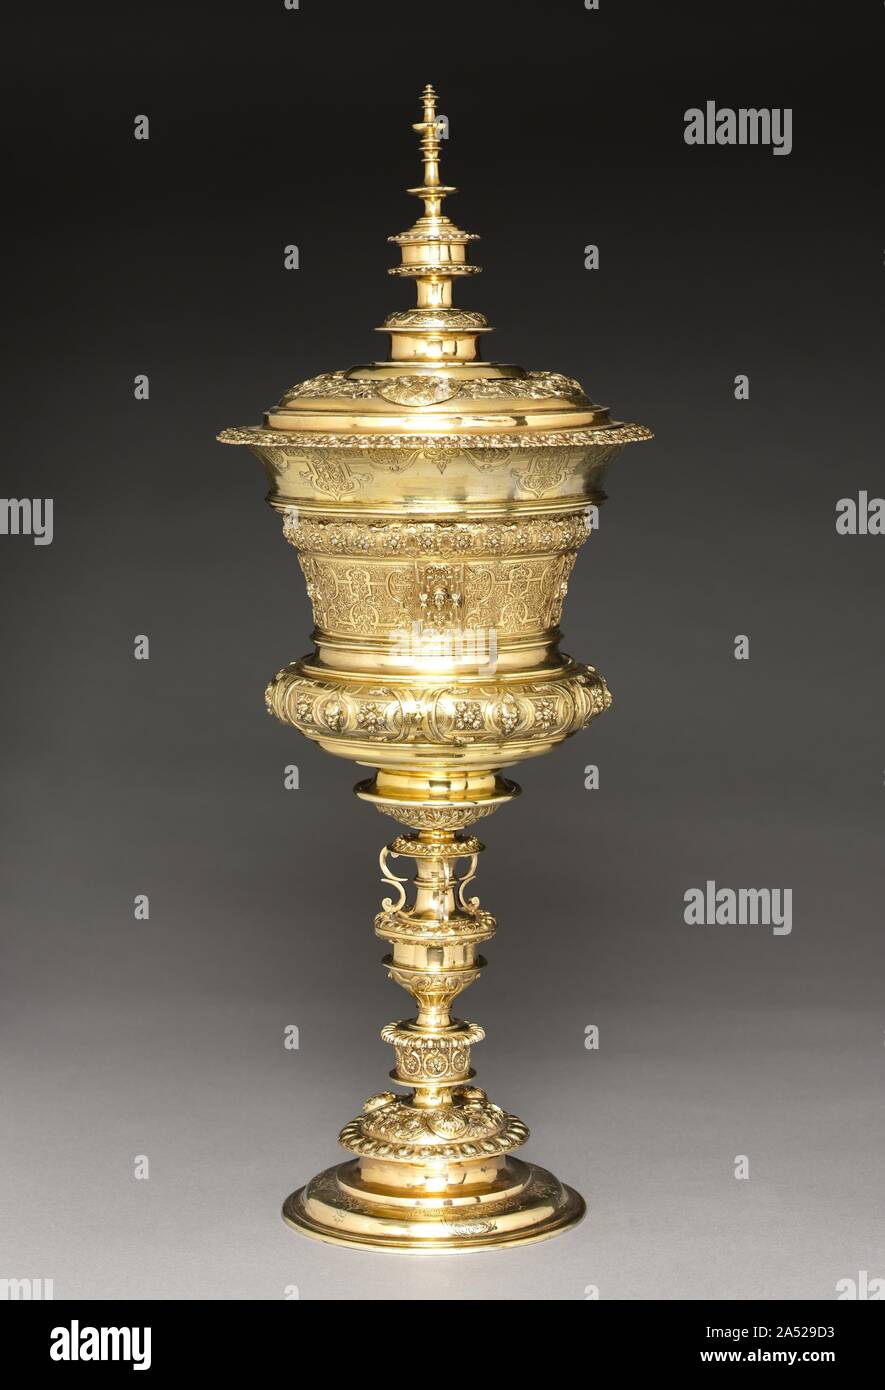 Standing Cup, mid-late 1500s. Large ceremonial silver cups with covers were a status symbol in the late 16th century, particularly when gilded like this superb example from Nuremberg. Stylish and grand, these cups provided the ultimate vessel from which a royal guest or aristocratic visitor could drink at a formal banquet. They came to be known as willkom, or welcome cups, as a result. The lid, mid-section, and base are all cast in sections, creating imposing height and stability for the great amount of silver used, a testament to the skill of the maker and the pocketbook of the owner. Stock Photo